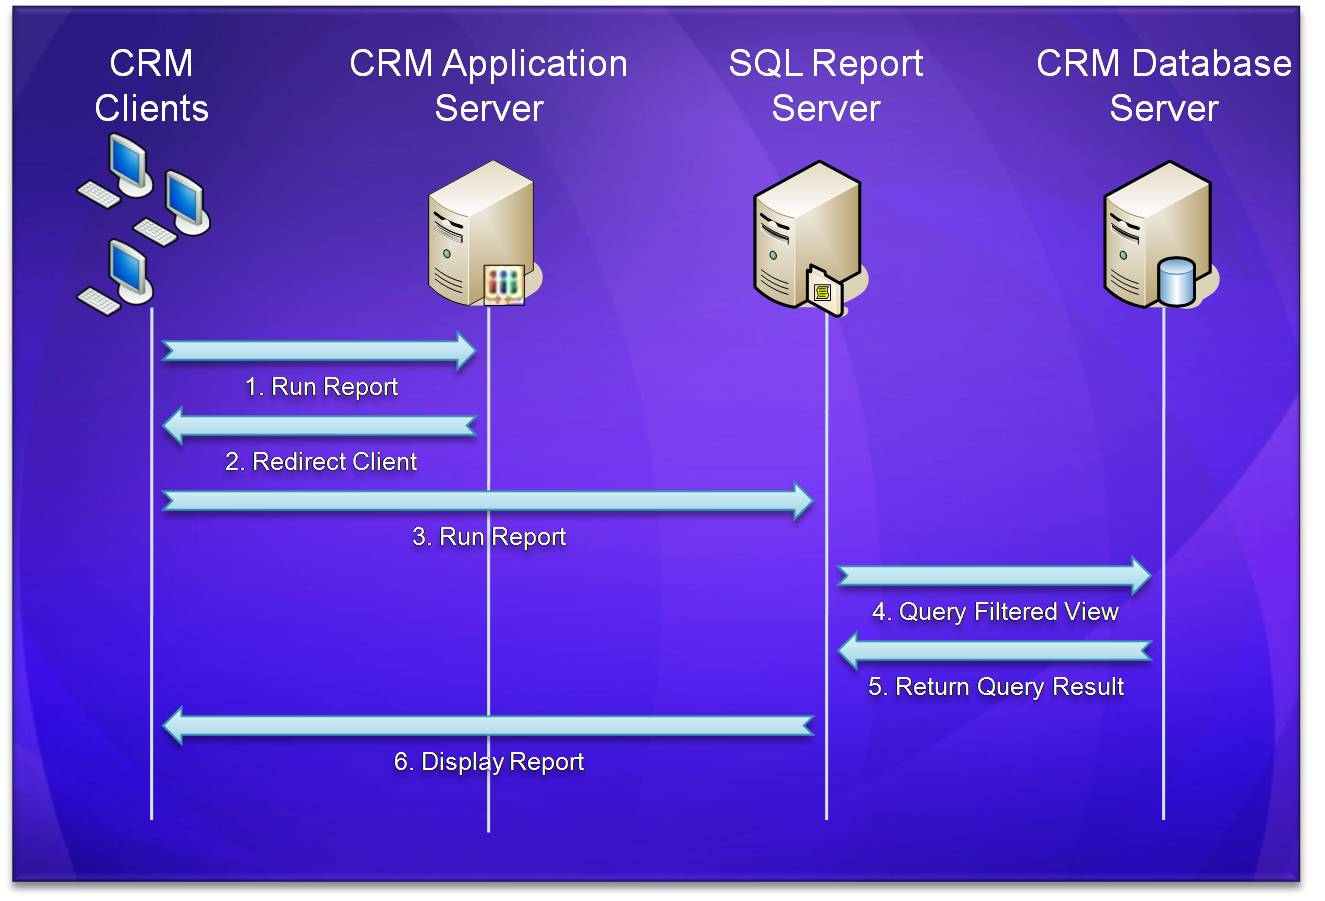 Running The Report In CRM 3.0